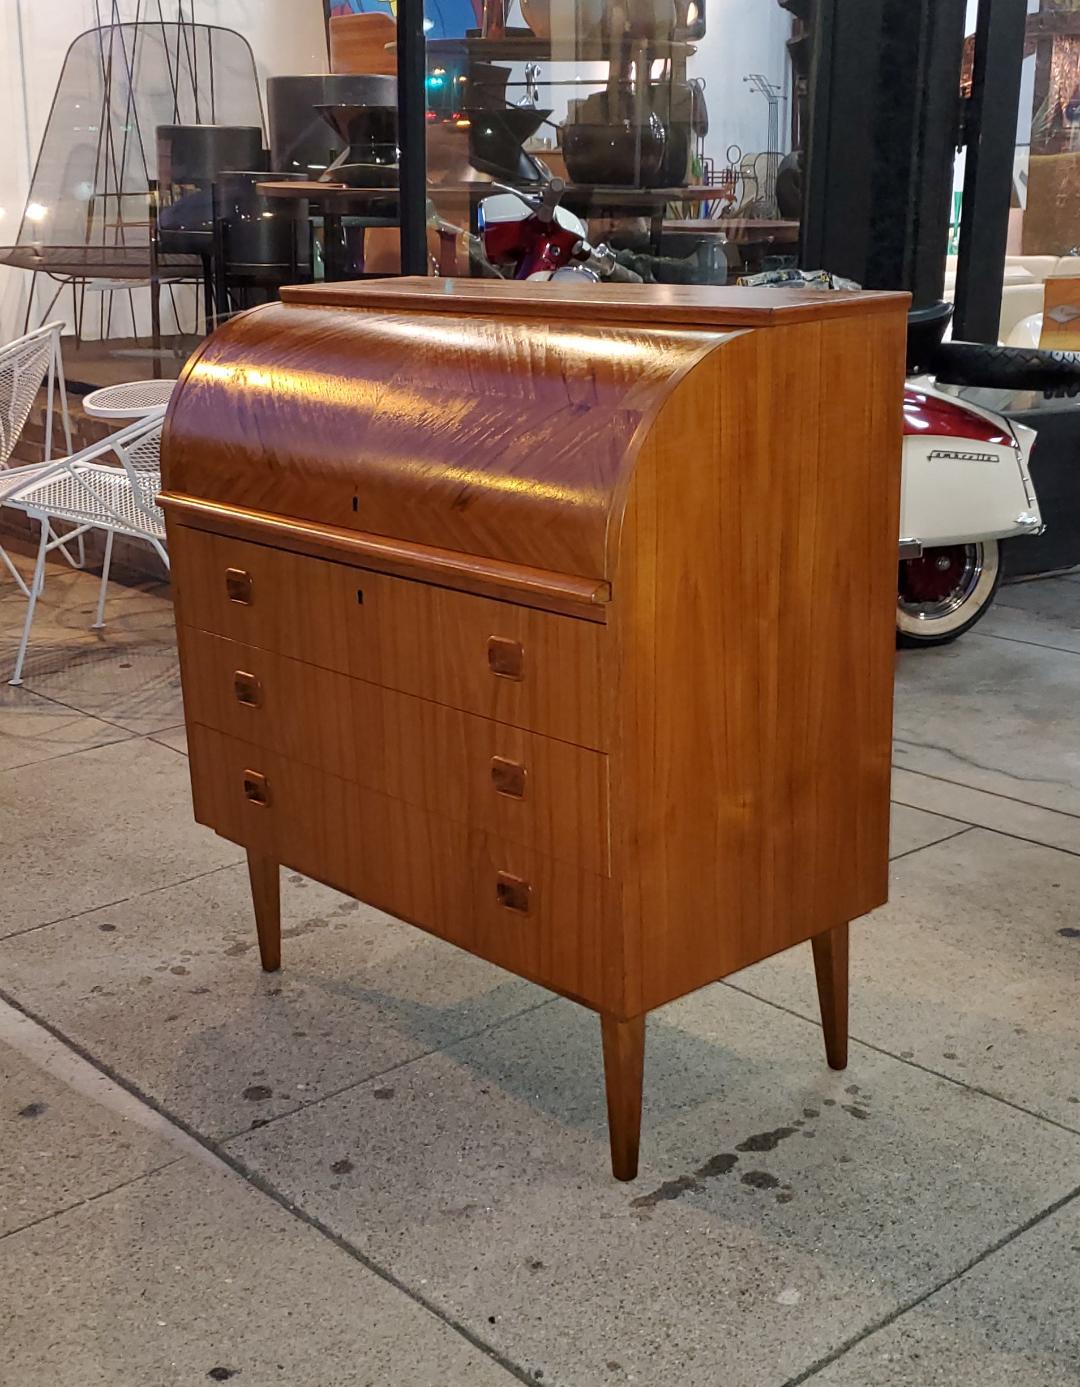 Vintage 1960s Teak Scandinavian Modern Roll Top Desk Designed by Egon Ostergaard For Svensk Mobelindustri, Made In Sweden. Also Known As A Swedish Secretaire.

Beautiful Teak Wood Grain Design On The Roll Top Itself, With Three Spacious Pull Out